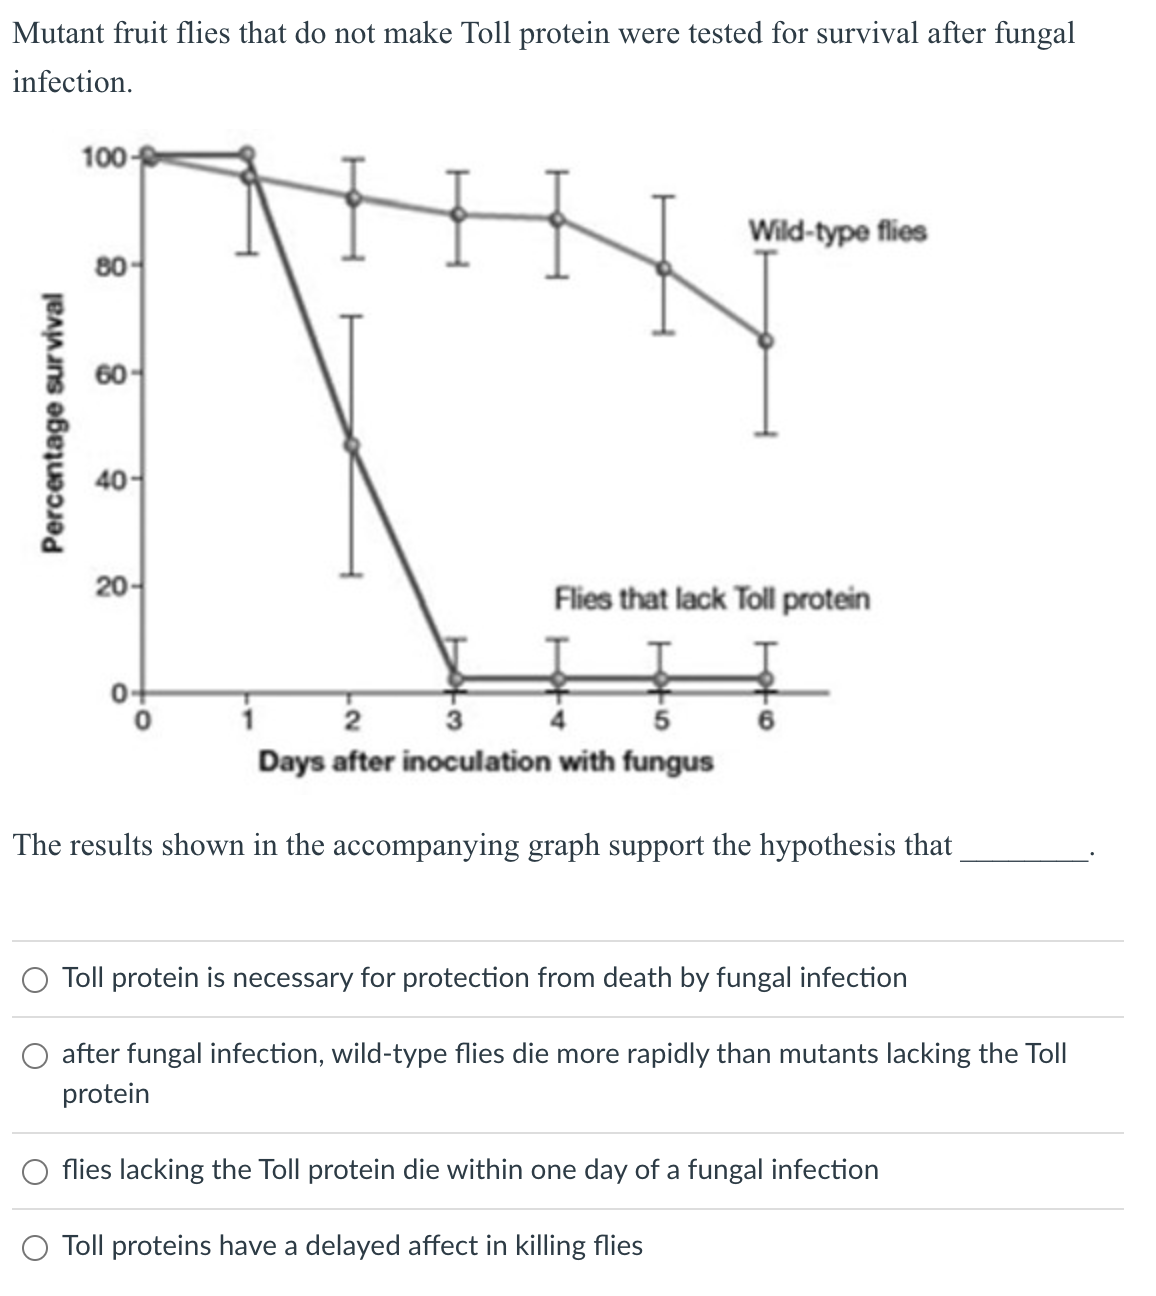 Mutant fruit flies that do not make Toll protein were tested for survival after fungal
infection.
Percentage survival
100-
80-
60-
40-
20-
Wild-type flies
Flies that lack Toll protein
2
3
Days after inoculation with fungus
The results shown in the accompanying graph support the hypothesis that
Toll protein is necessary for protection from death by fungal infection
after fungal infection, wild-type flies die more rapidly than mutants lacking the Toll
protein
flies lacking the Toll protein die within one day of a fungal infection
Toll proteins have a delayed affect in killing flies